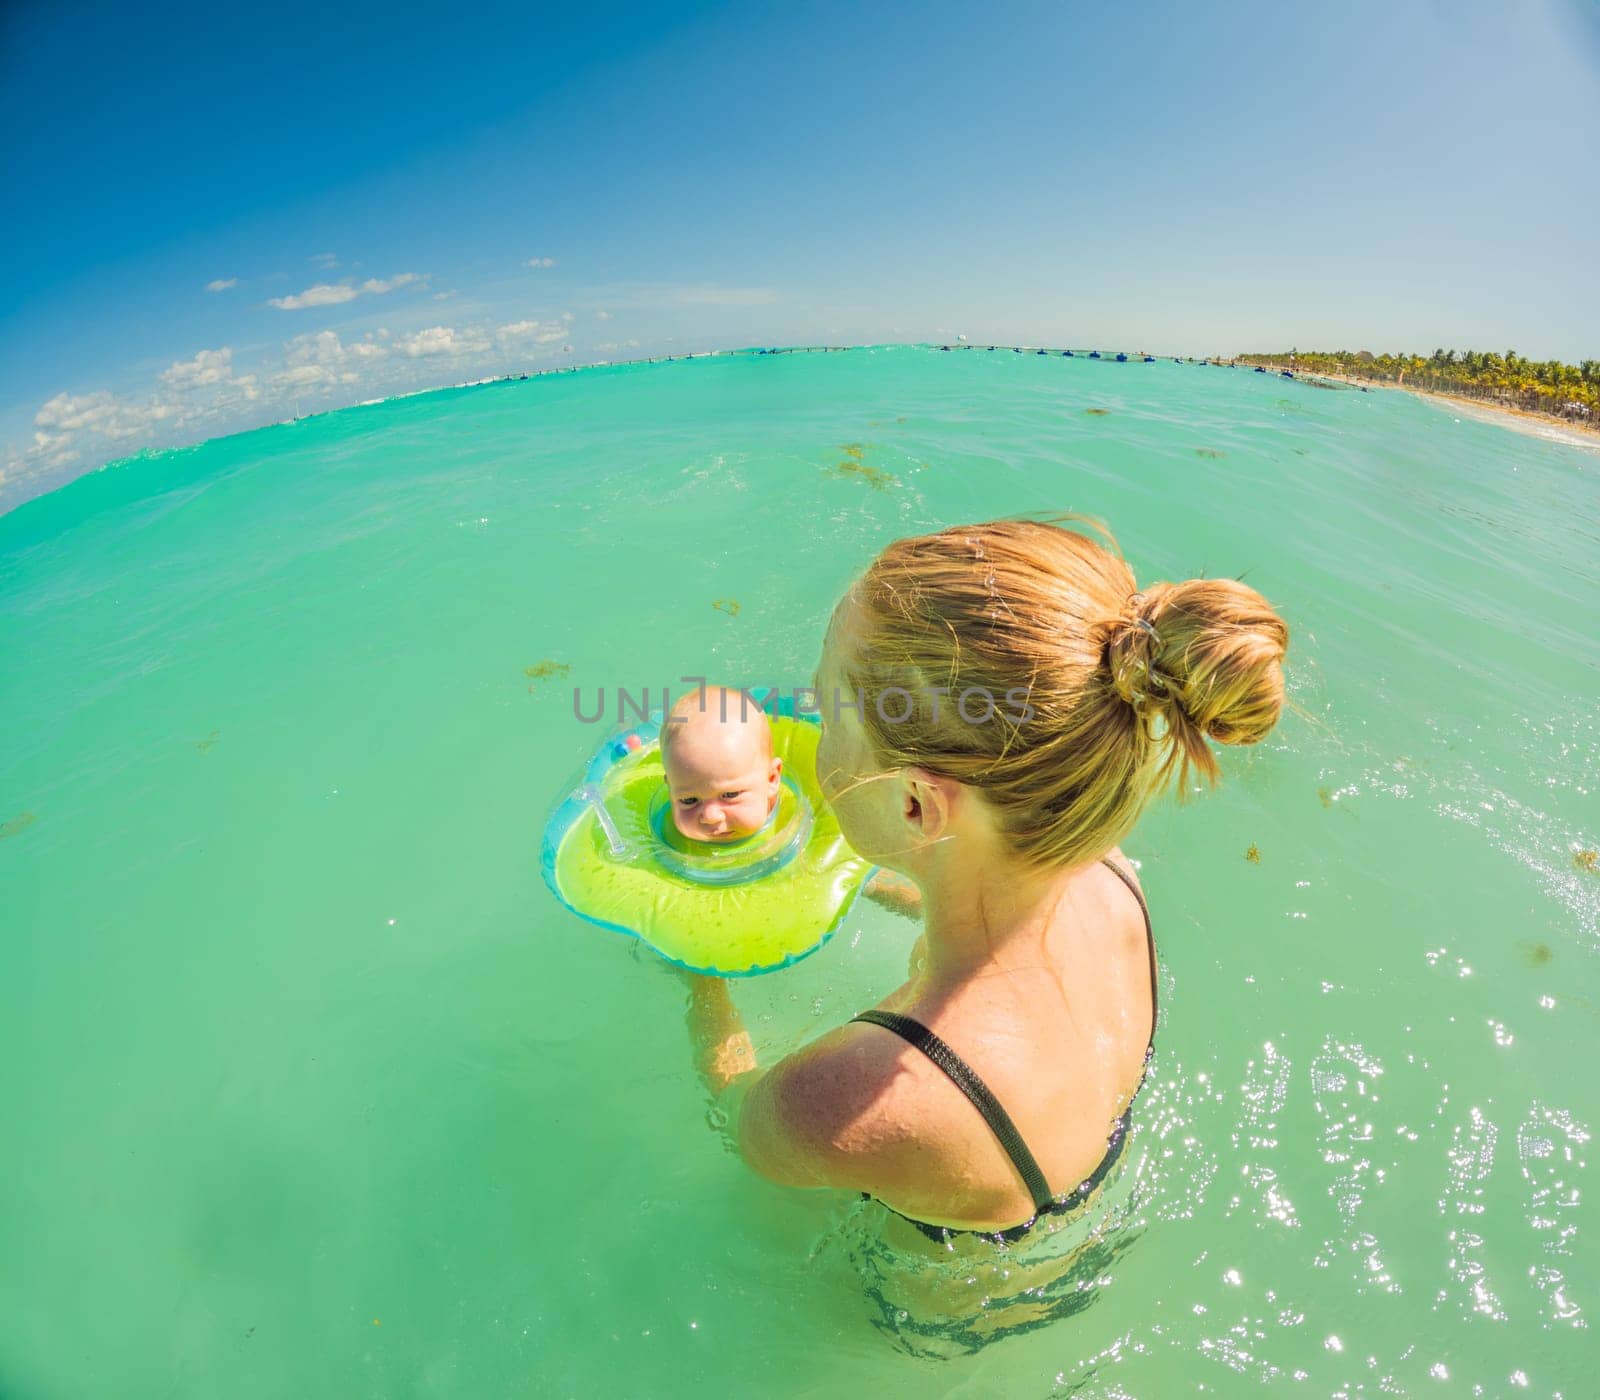 Adorable baby swims in an inflatable ring around his neck, enjoying the sea with his mom